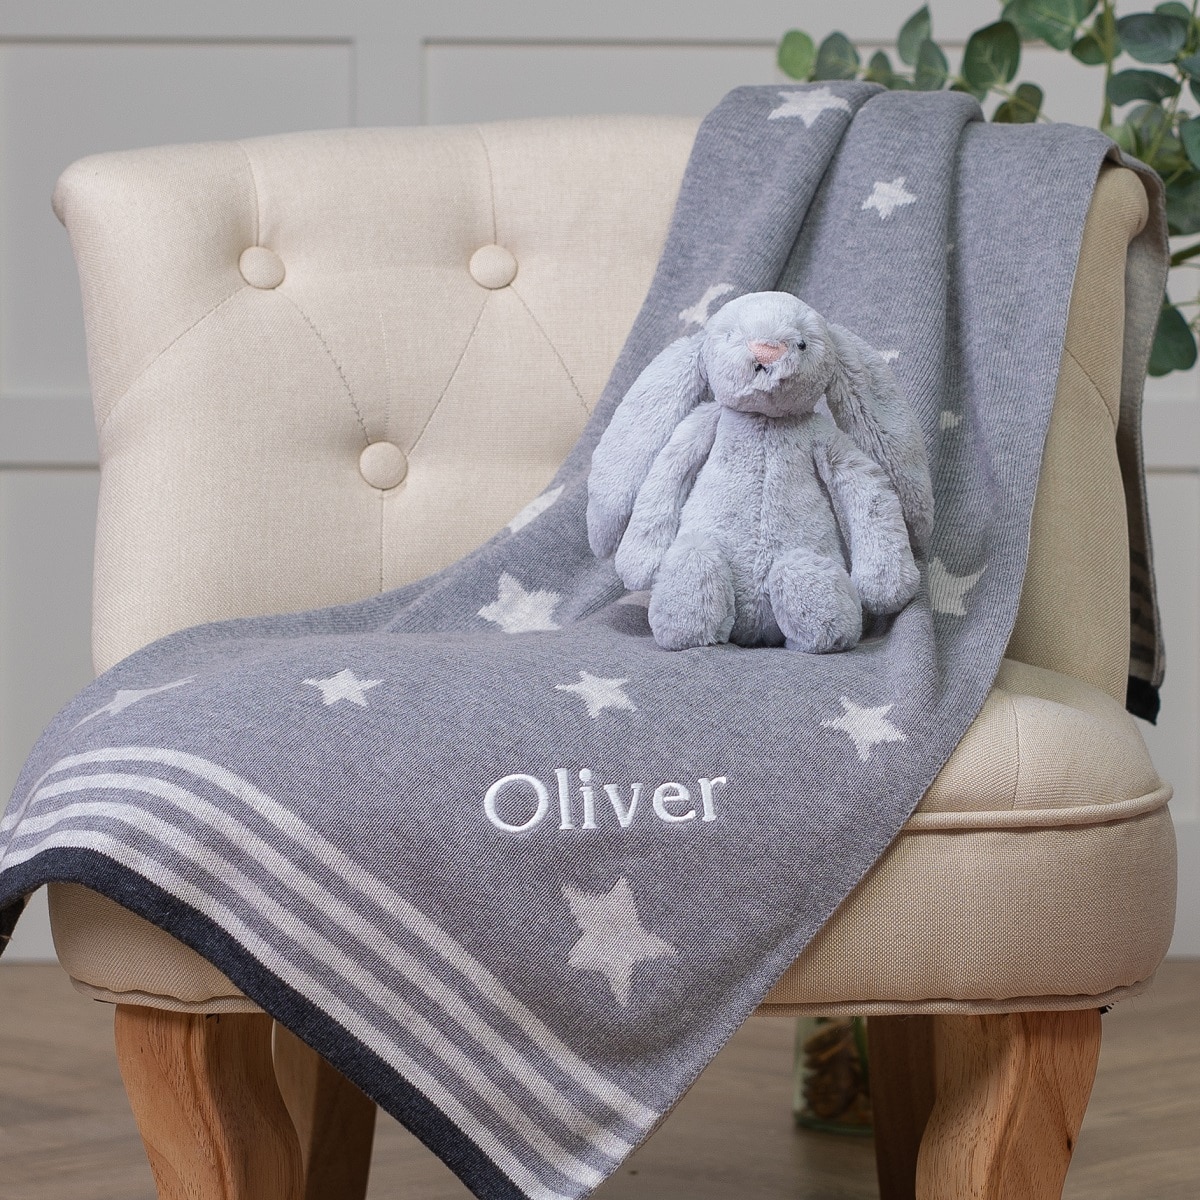 Ziggle personalised grey stars cotton knitted baby blanket